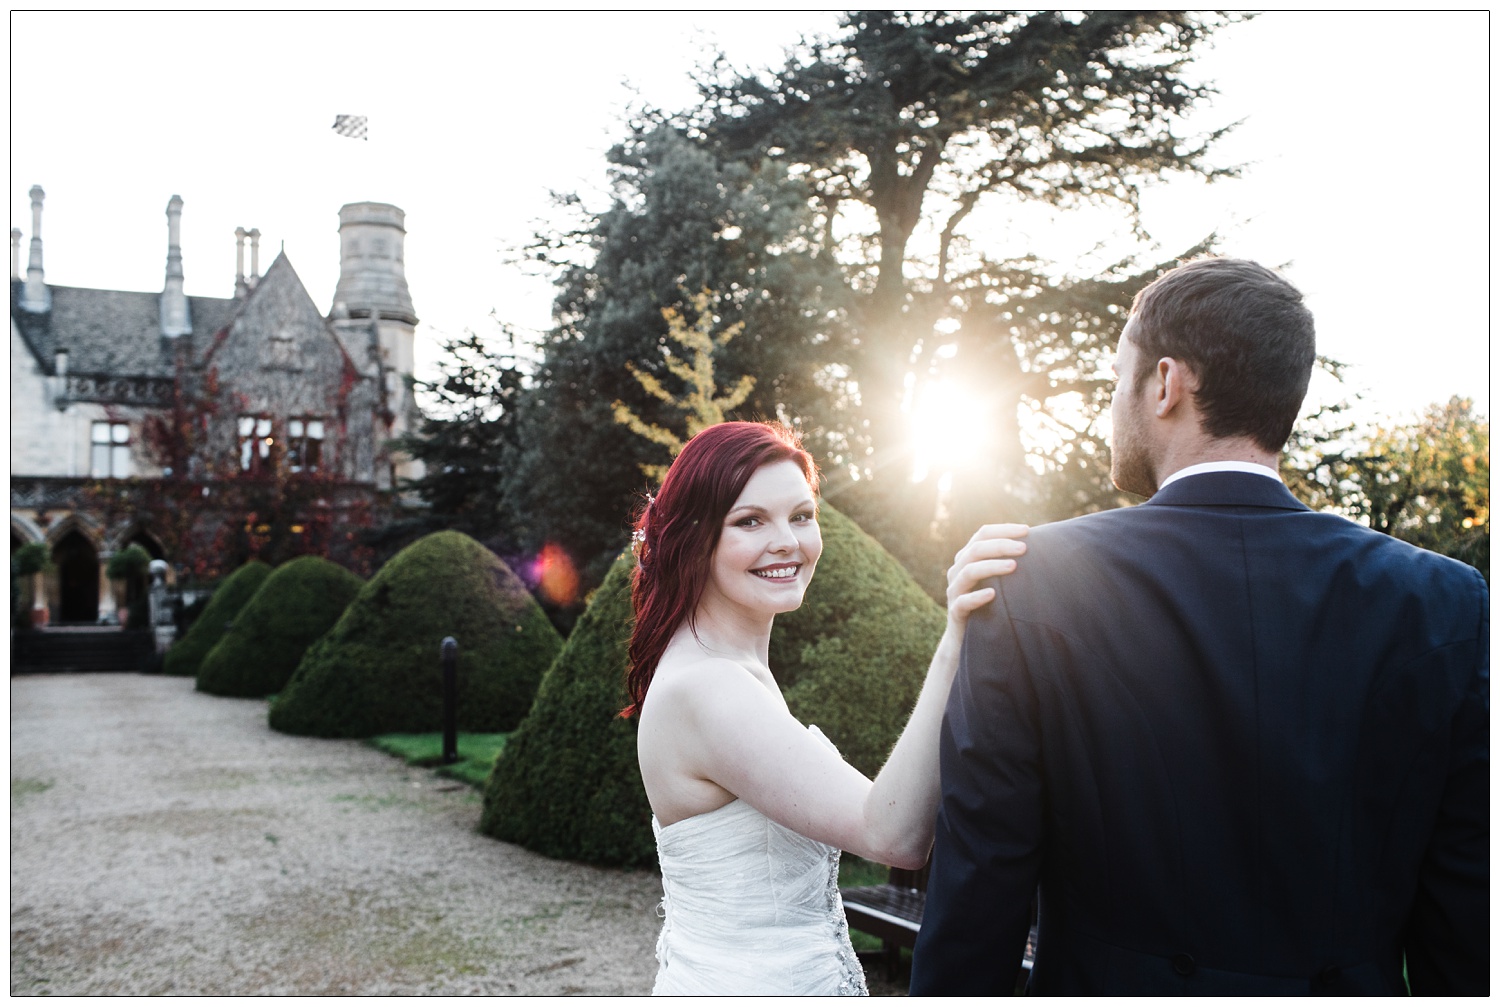 Outside the Manor by the Lake venue, the October sunlight is soft and coming through the trees. Bride with red hair looks at the camera with her hand on her new husband's shoulder.